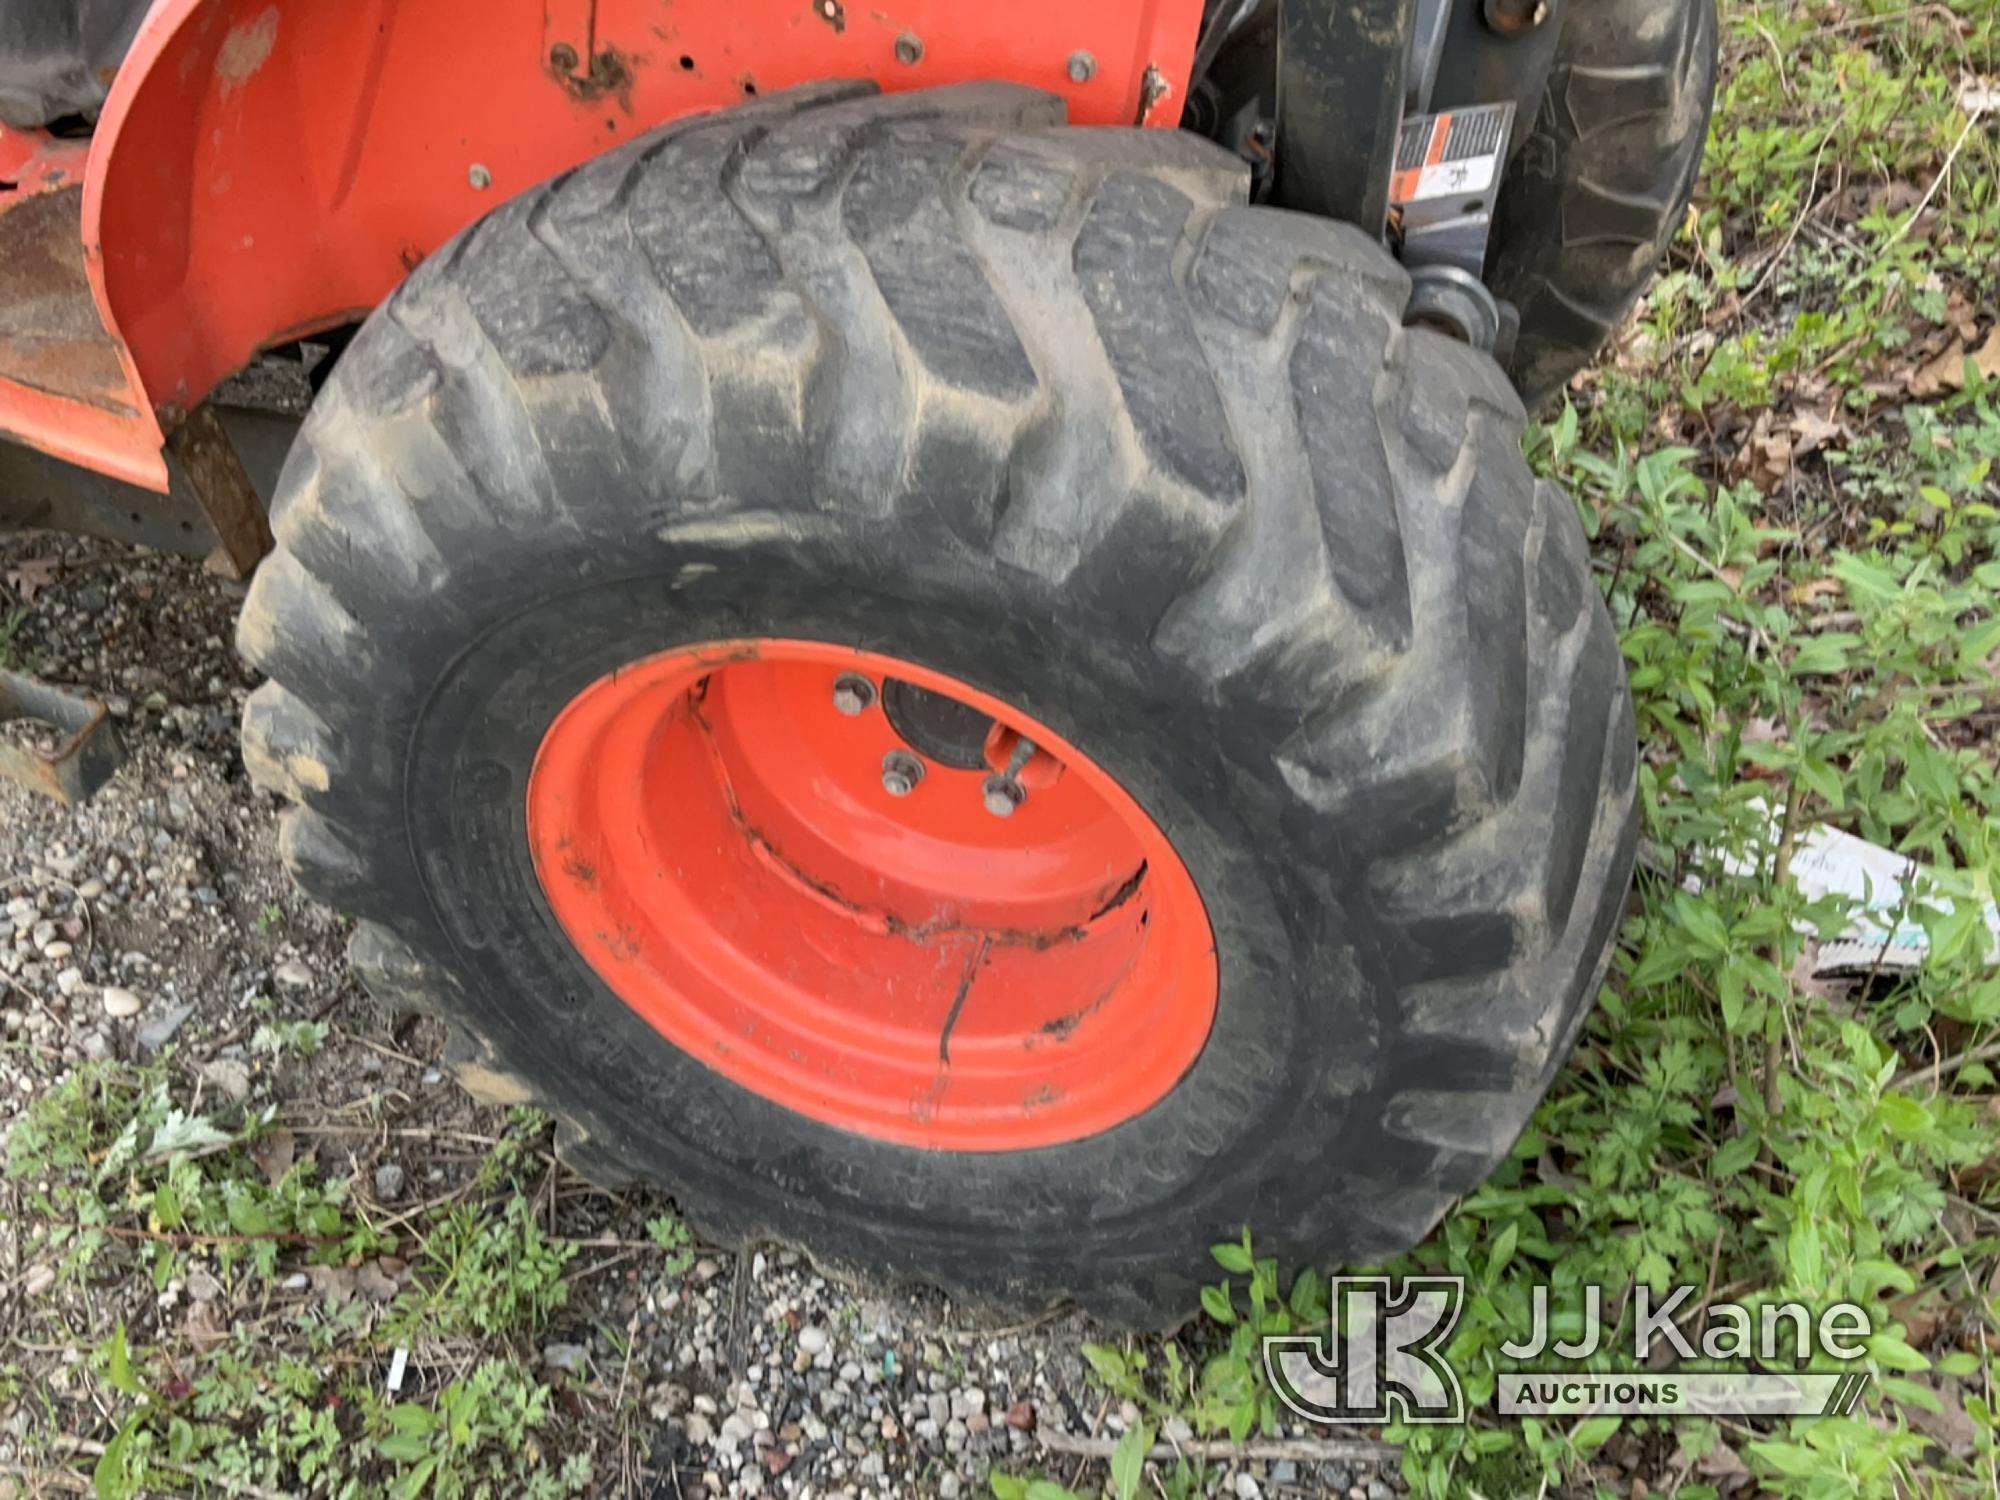 (Bellport, NY) 2012 Kubota B26 Utility Tractor Not Running, Condition Unknown, Missing Parts) (Note: